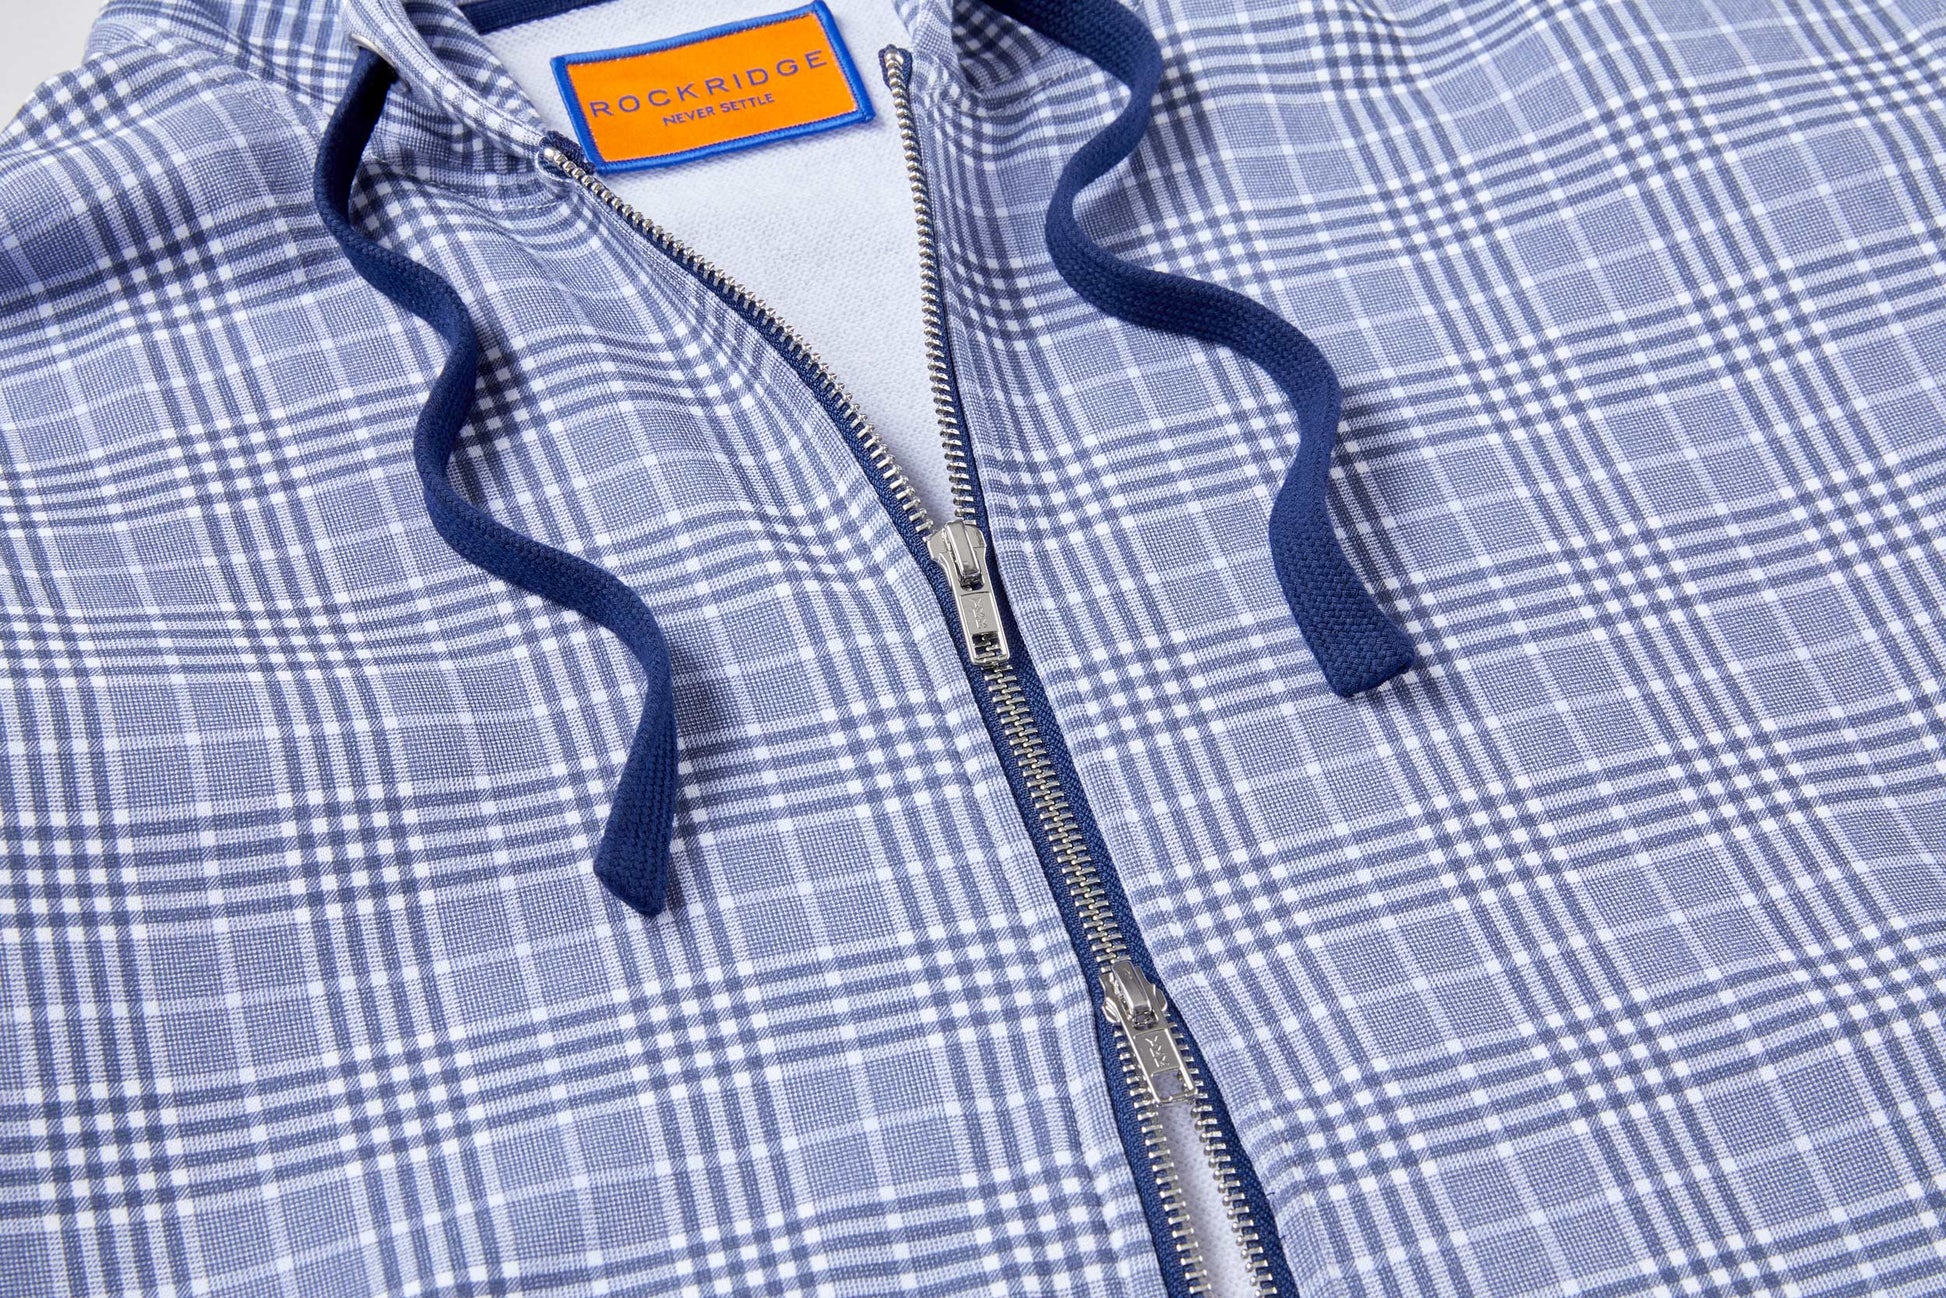 Our Plaid hoodie is cut from a soft fleece back cotton jersey. The tailored fit hoodie is a comfortable choice for weekends, but sharp enough for the casual office environment. 